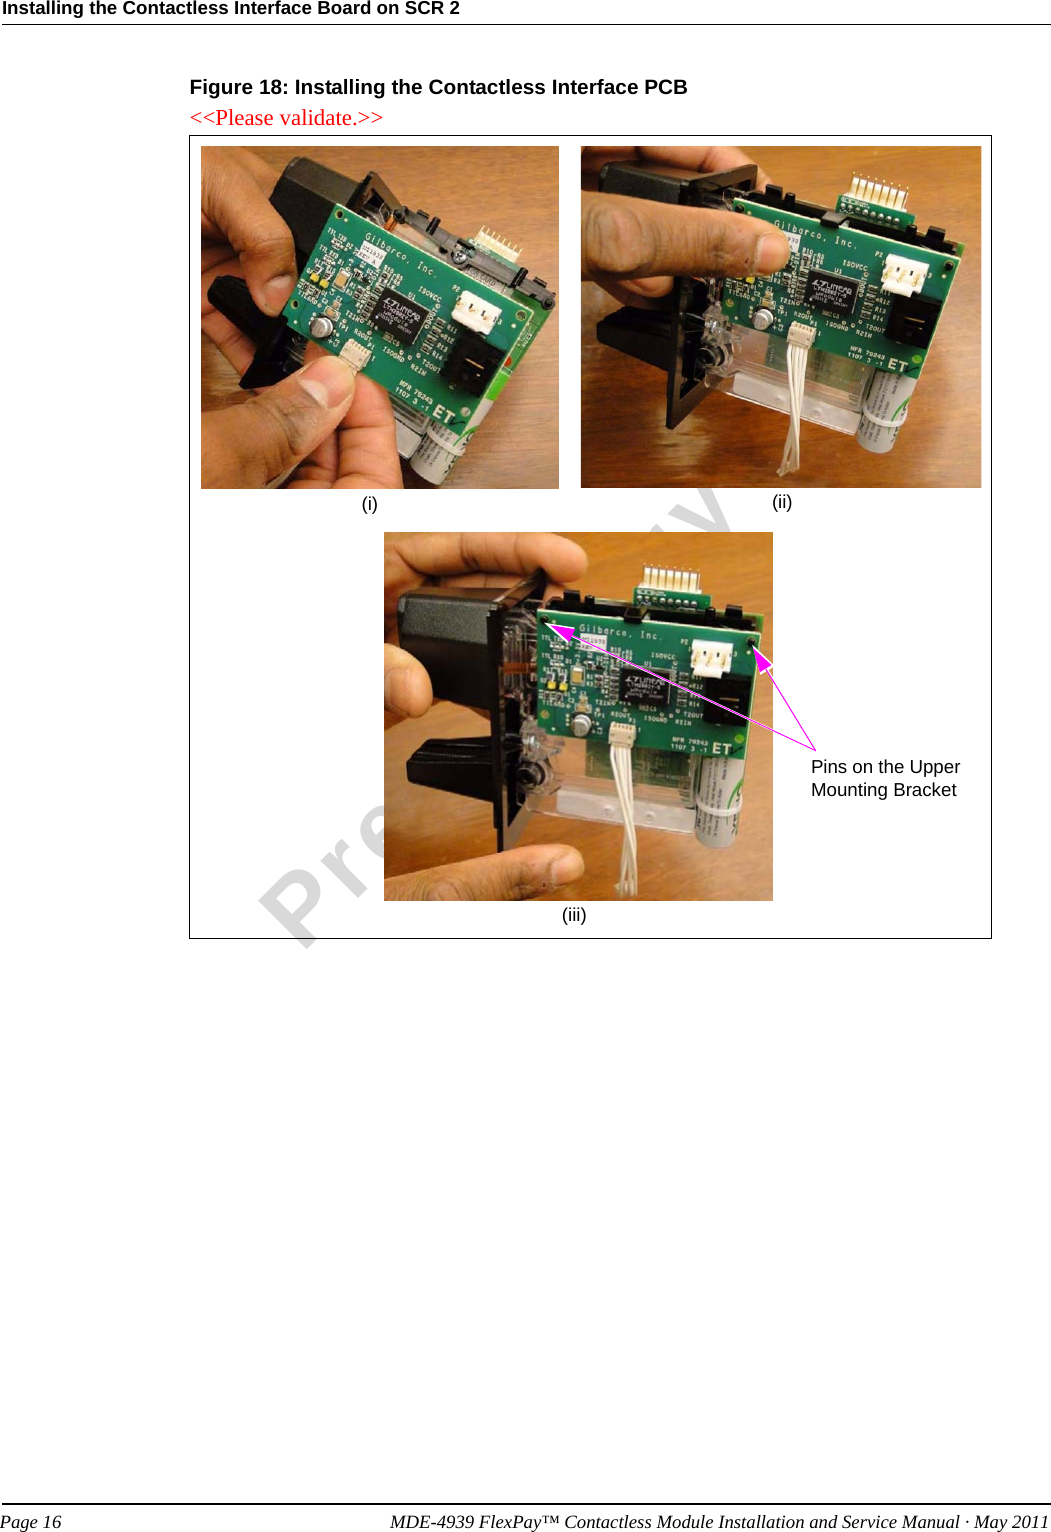 Installing the Contactless Interface Board on SCR 2PreliminaryPage 16            MDE-4939 FlexPay™ Contactless Module Installation and Service Manual · May 2011Figure 18: Installing the Contactless Interface PCB(i) (ii)(iii)Pins on the Upper Mounting Bracket&lt;&lt;Please validate.&gt;&gt;